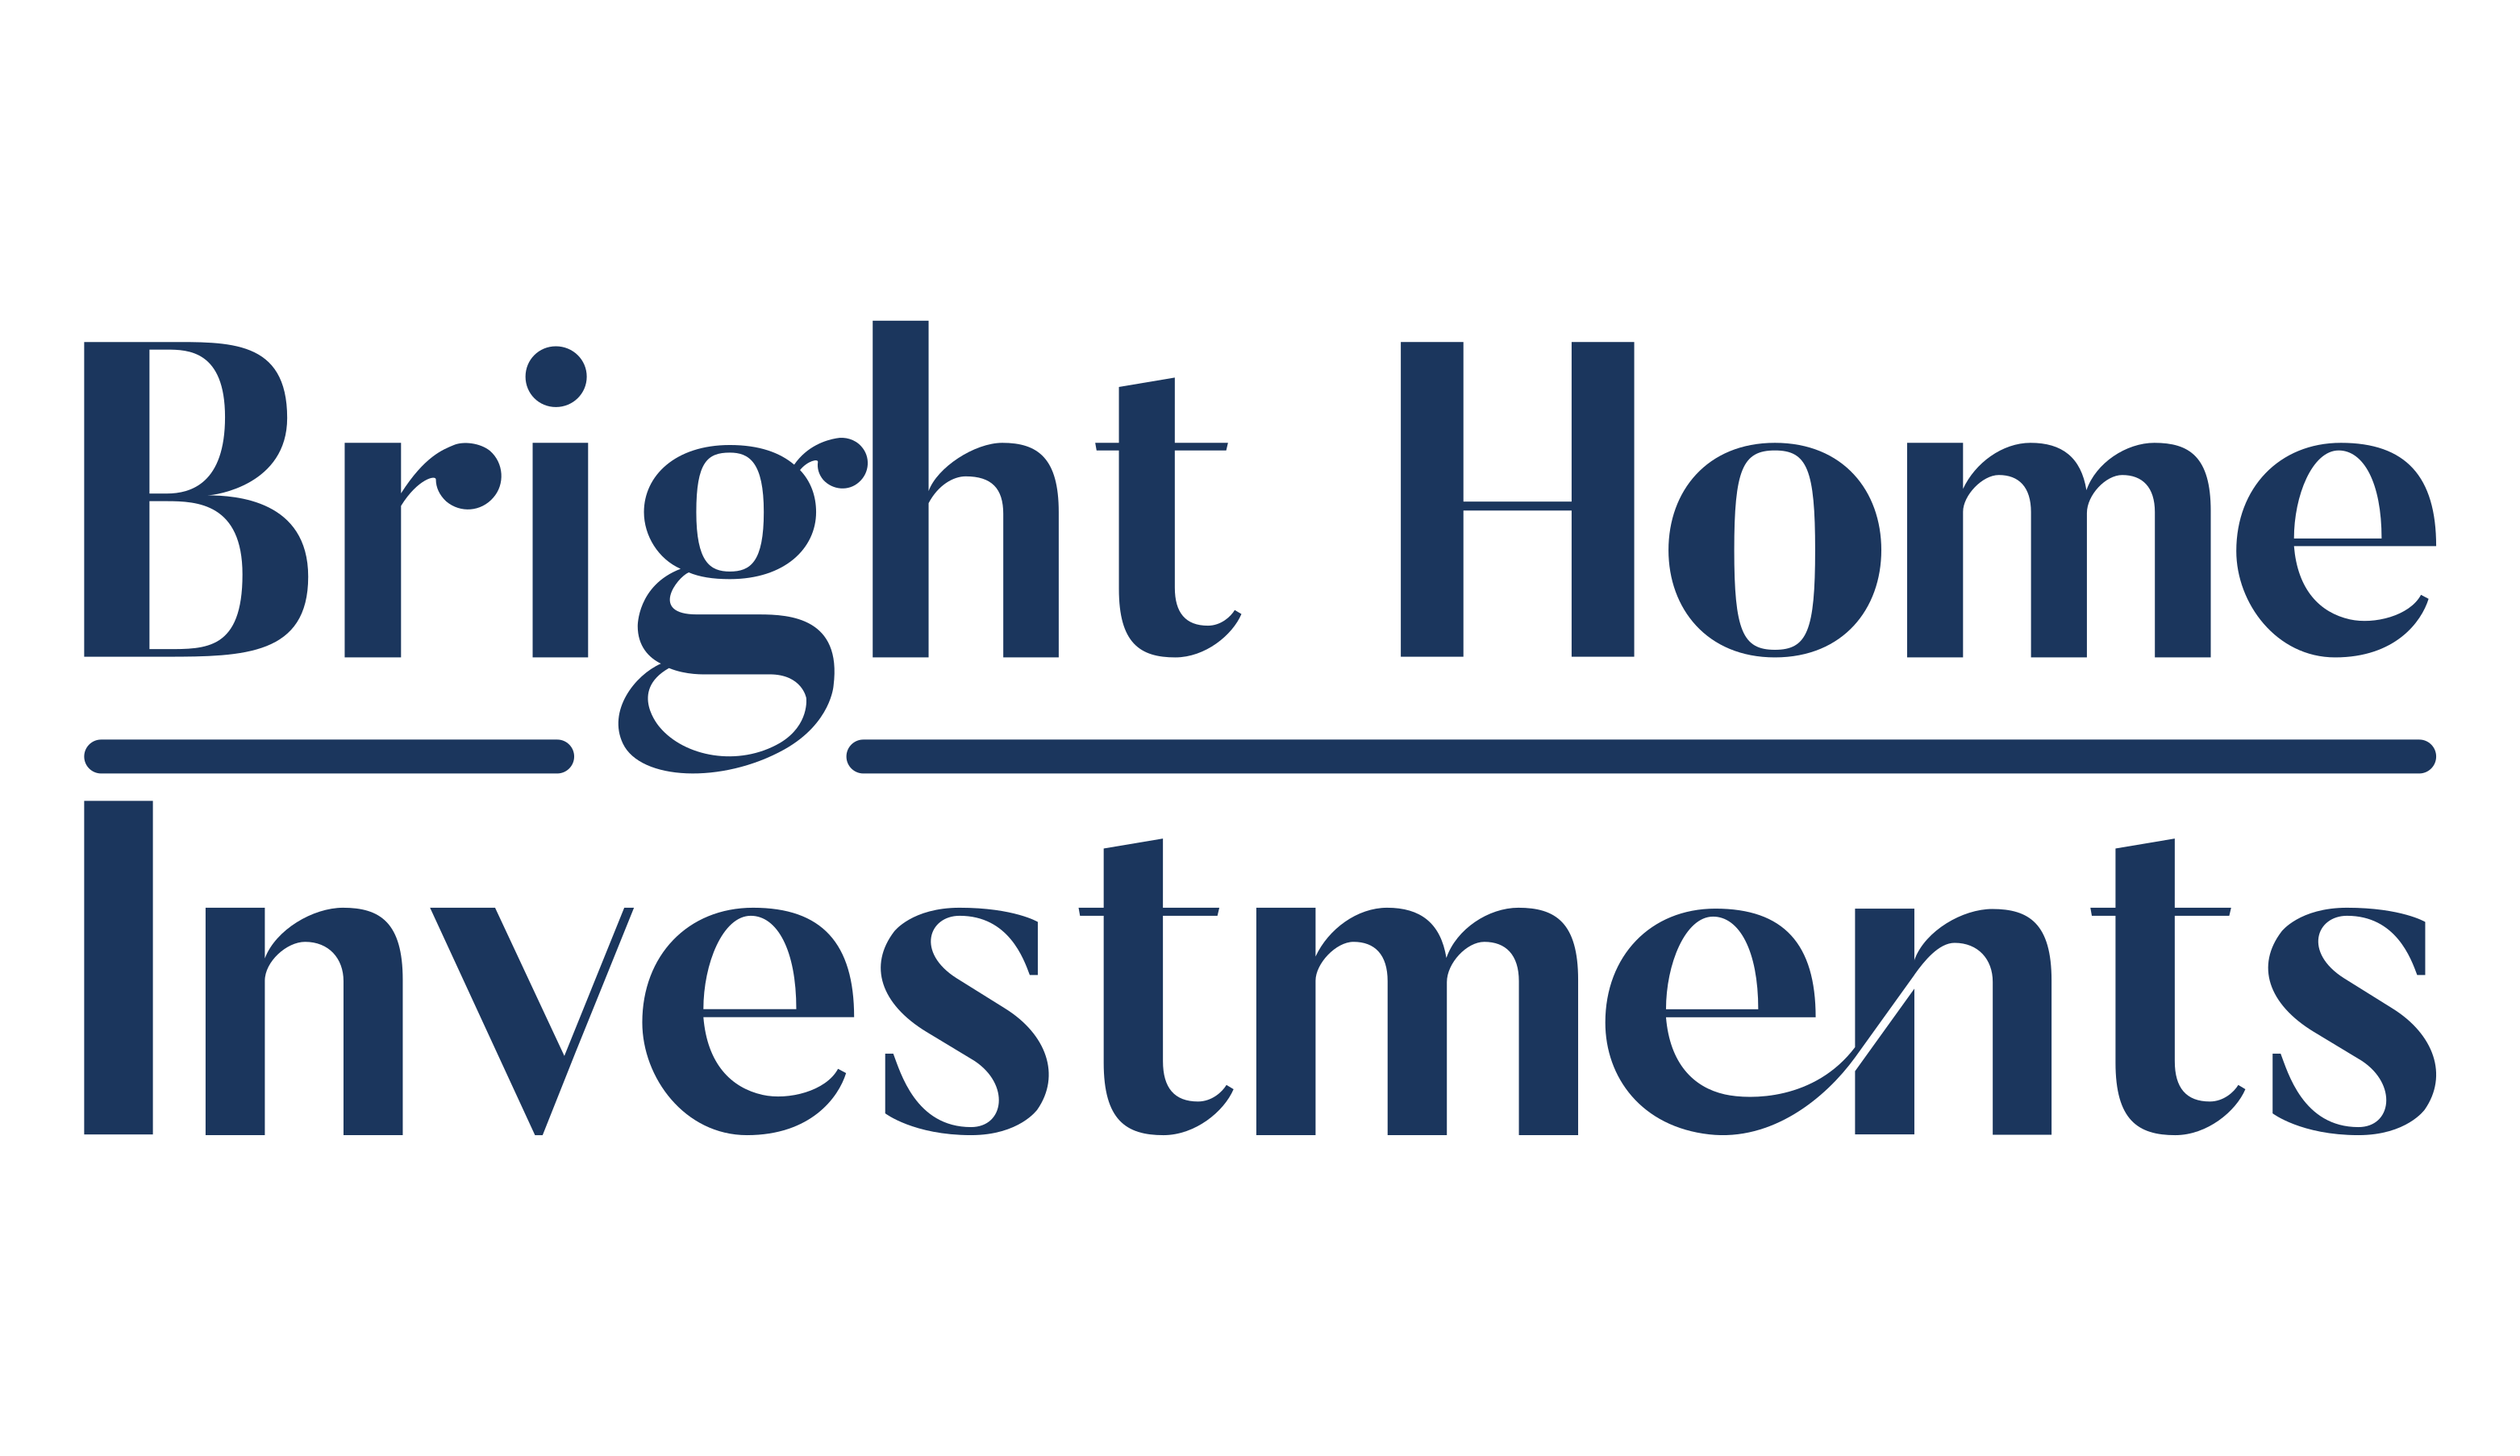 Bright Home Investments LLC - Get a fast cash offer on your property